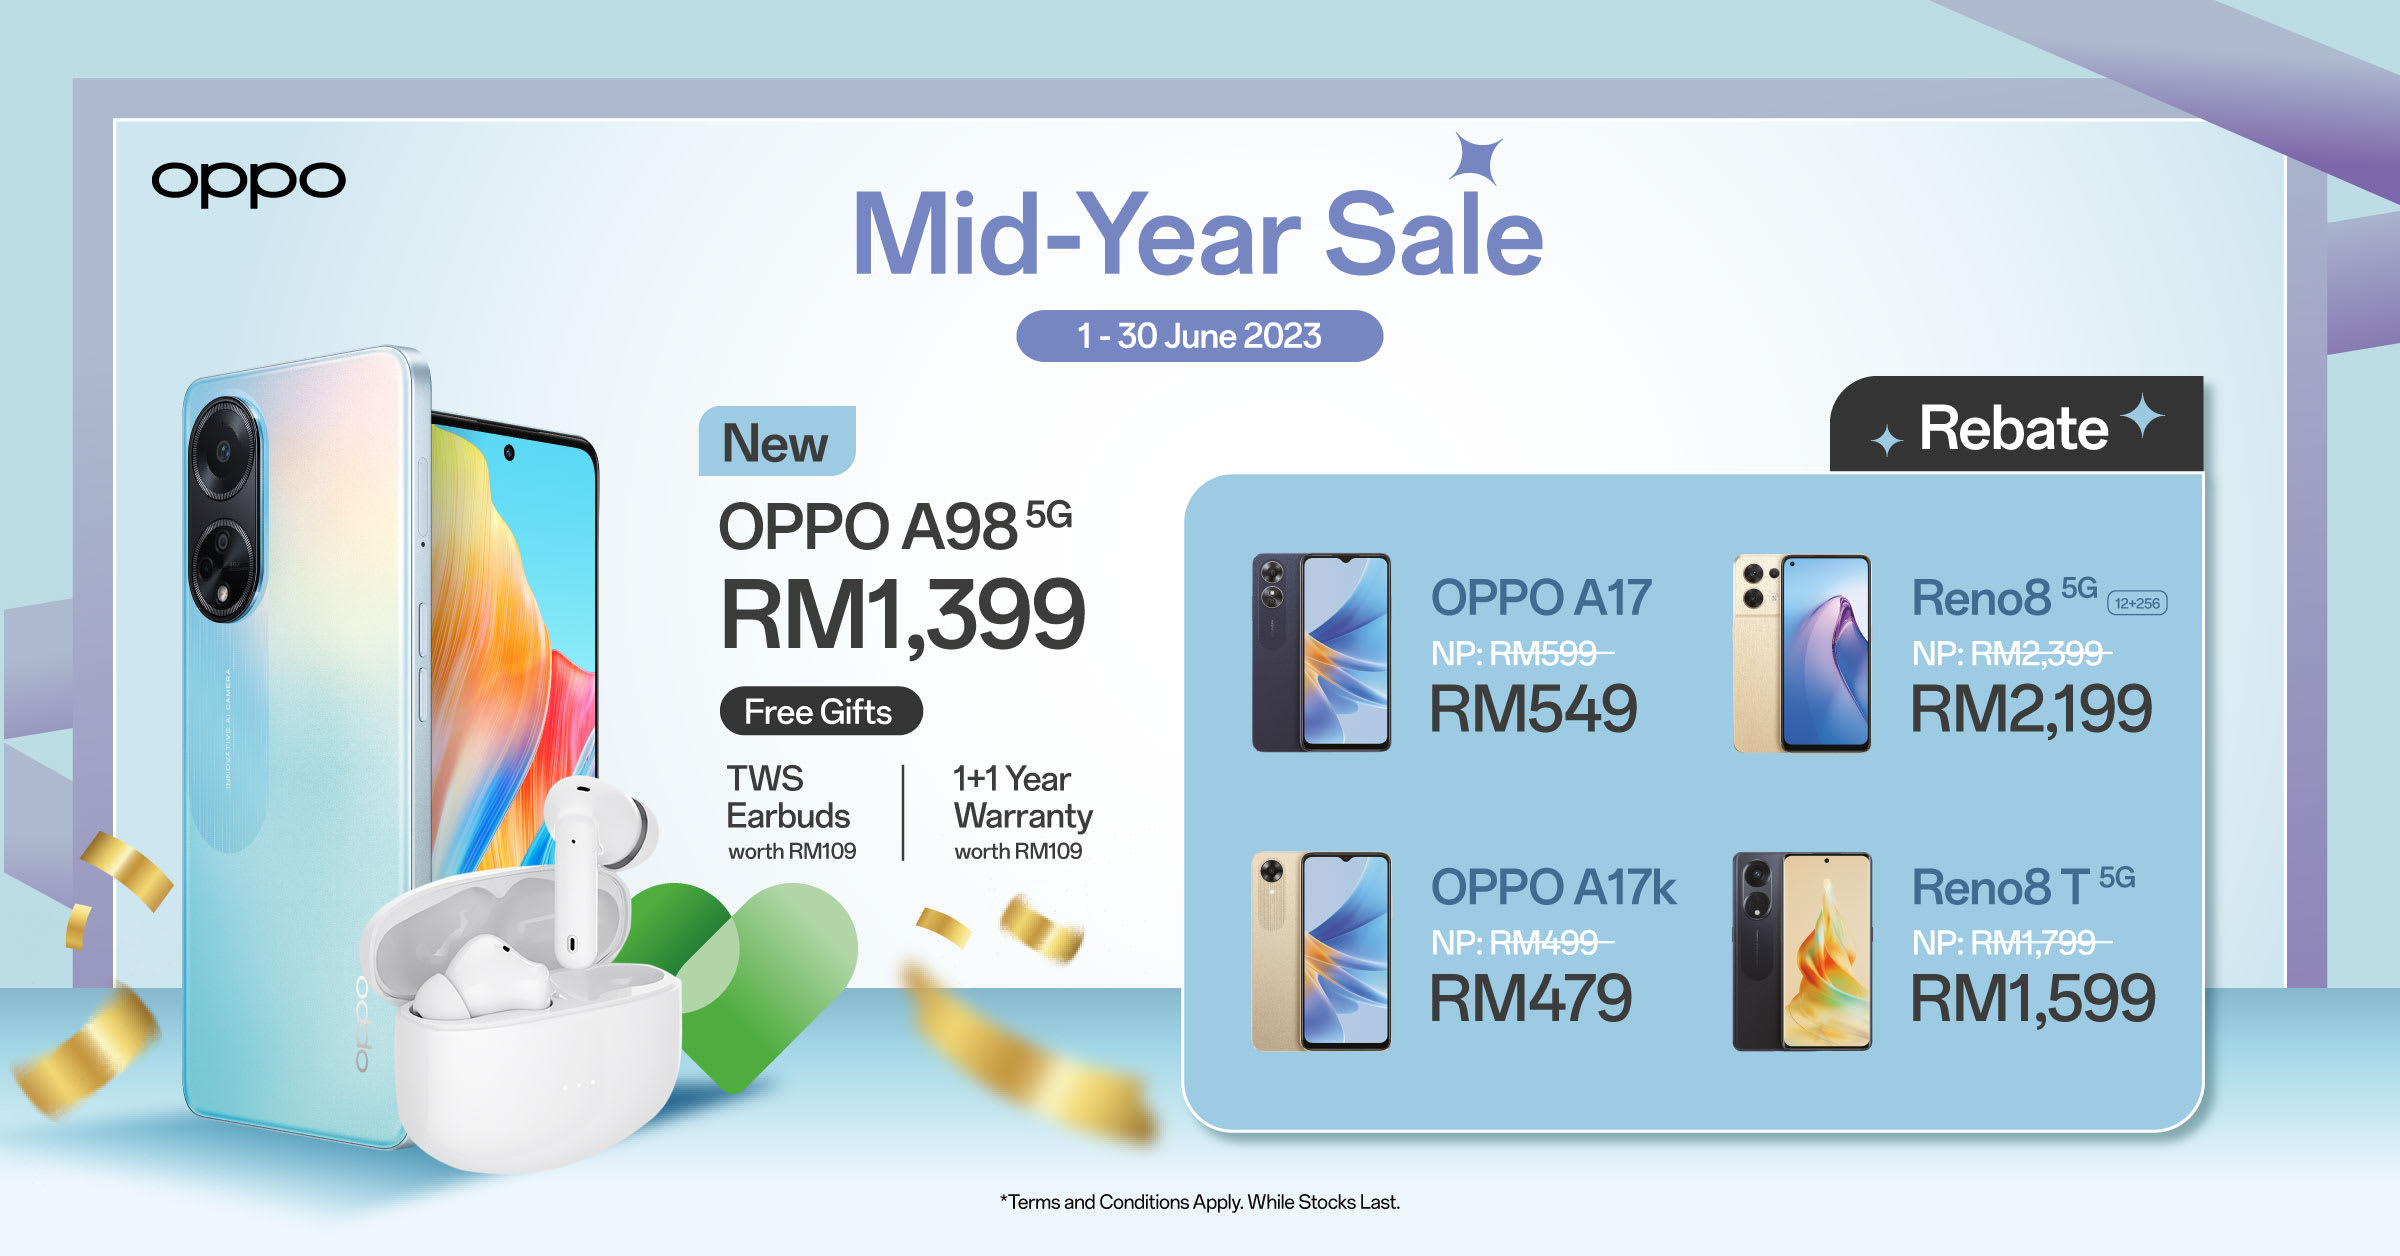 OPPO Mid-Year Sale 2023